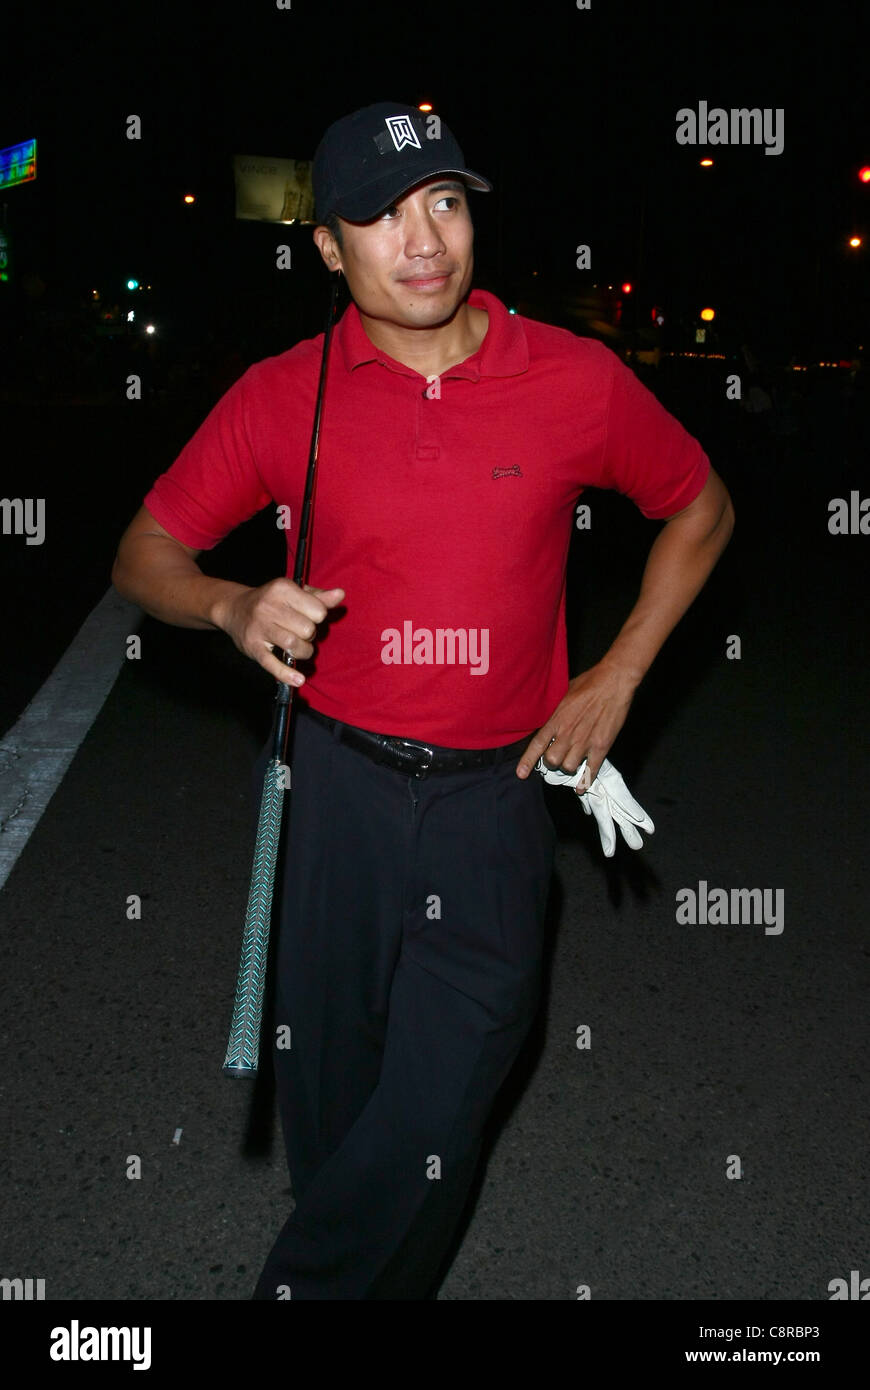 TIGER WOODS COSTUME 2011 WEST HOLLYWOOD COSTUME CARNAVAL LOS ANGELES  CALIFORNIA USA 31 October 2011 Stock Photo - Alamy